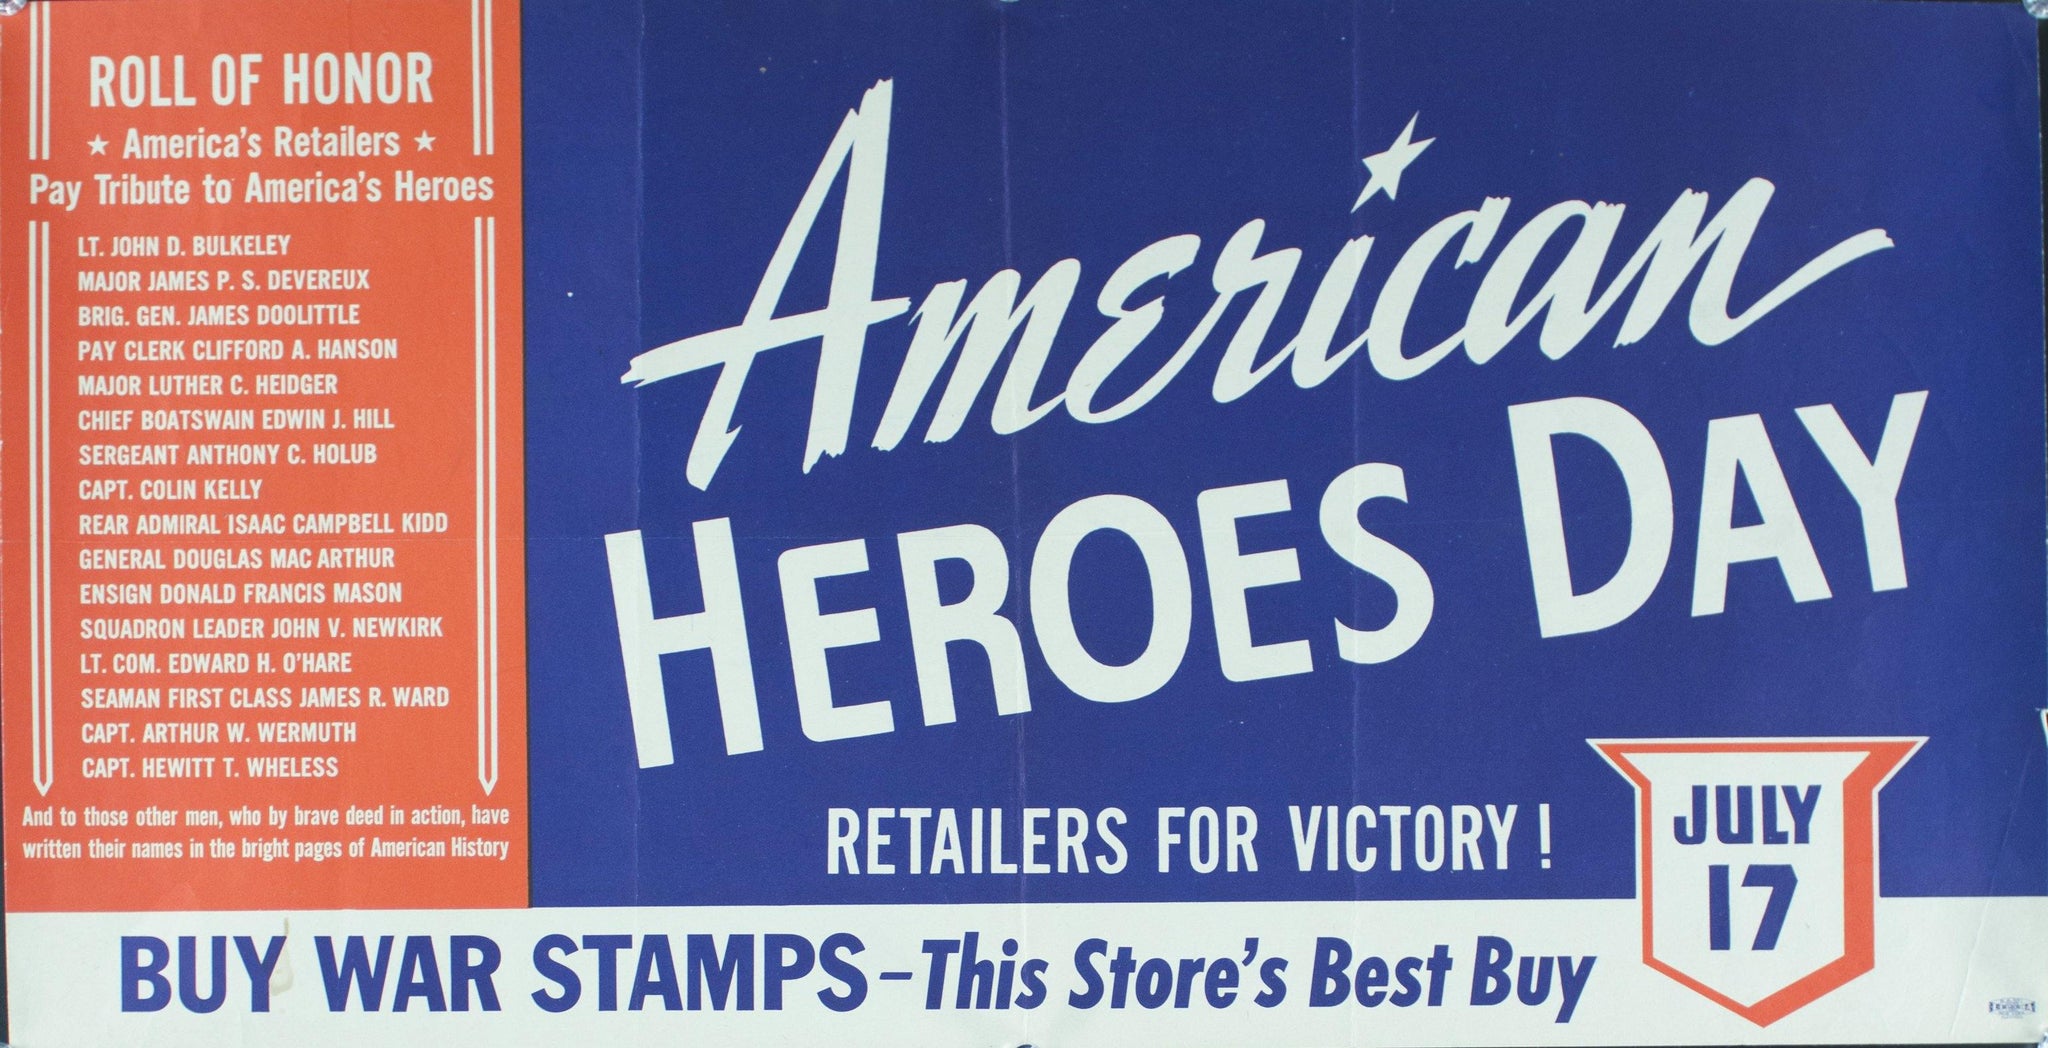 1942 American Heroes Day - Buy War Stamps - Golden Age Posters